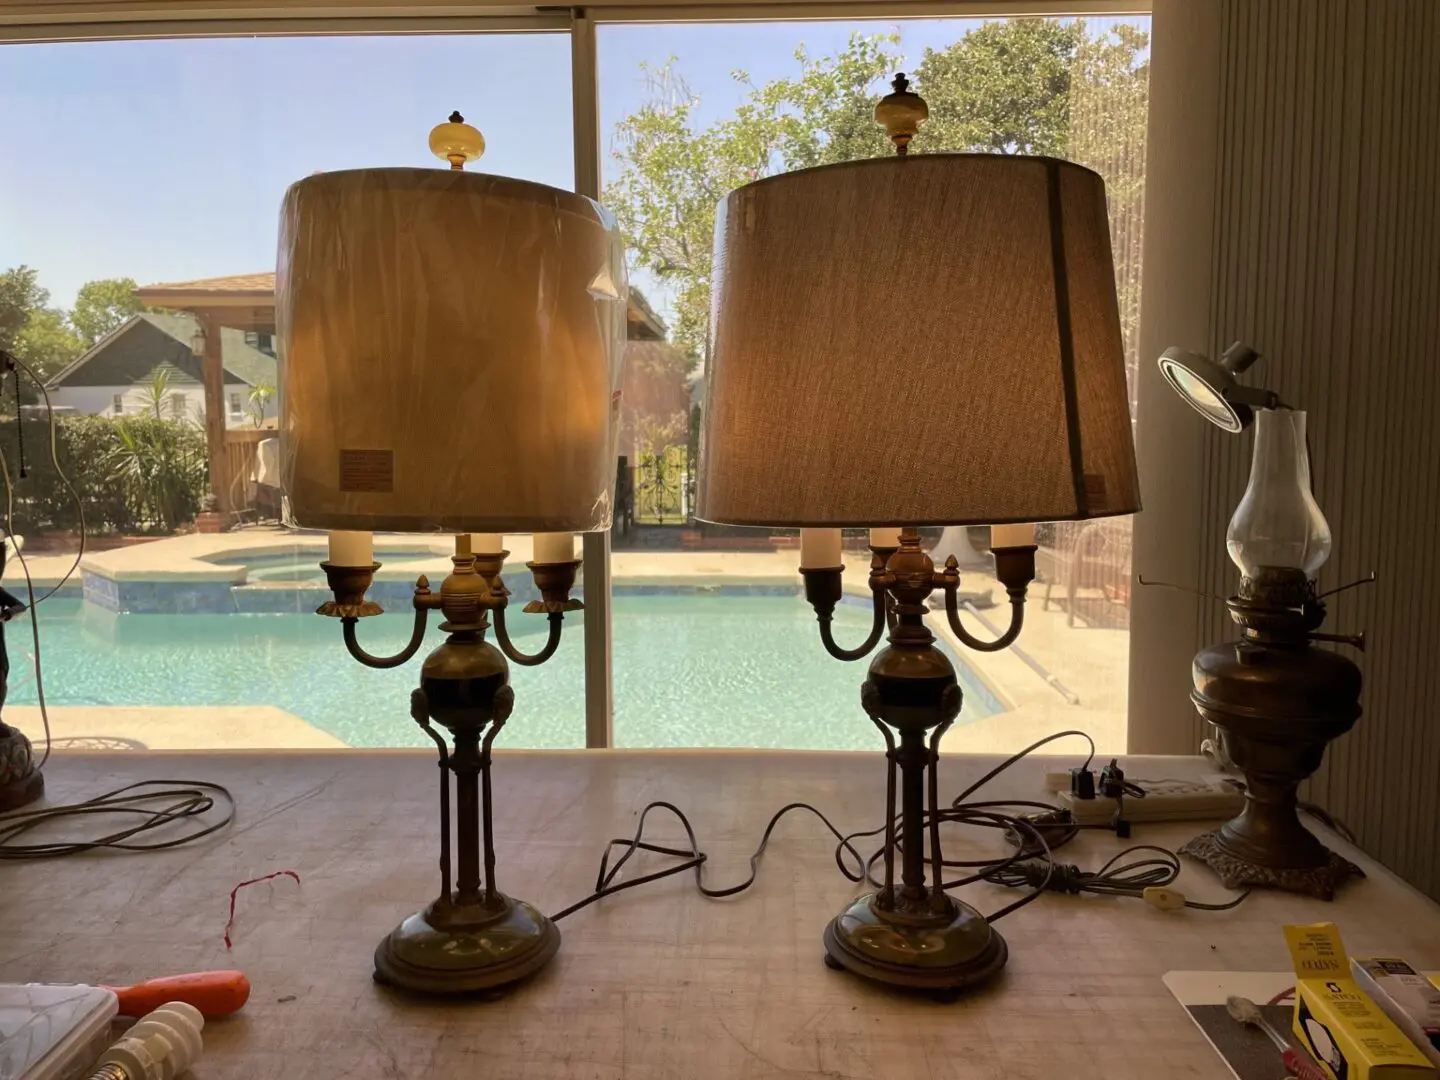 two big lamps on the table for repair